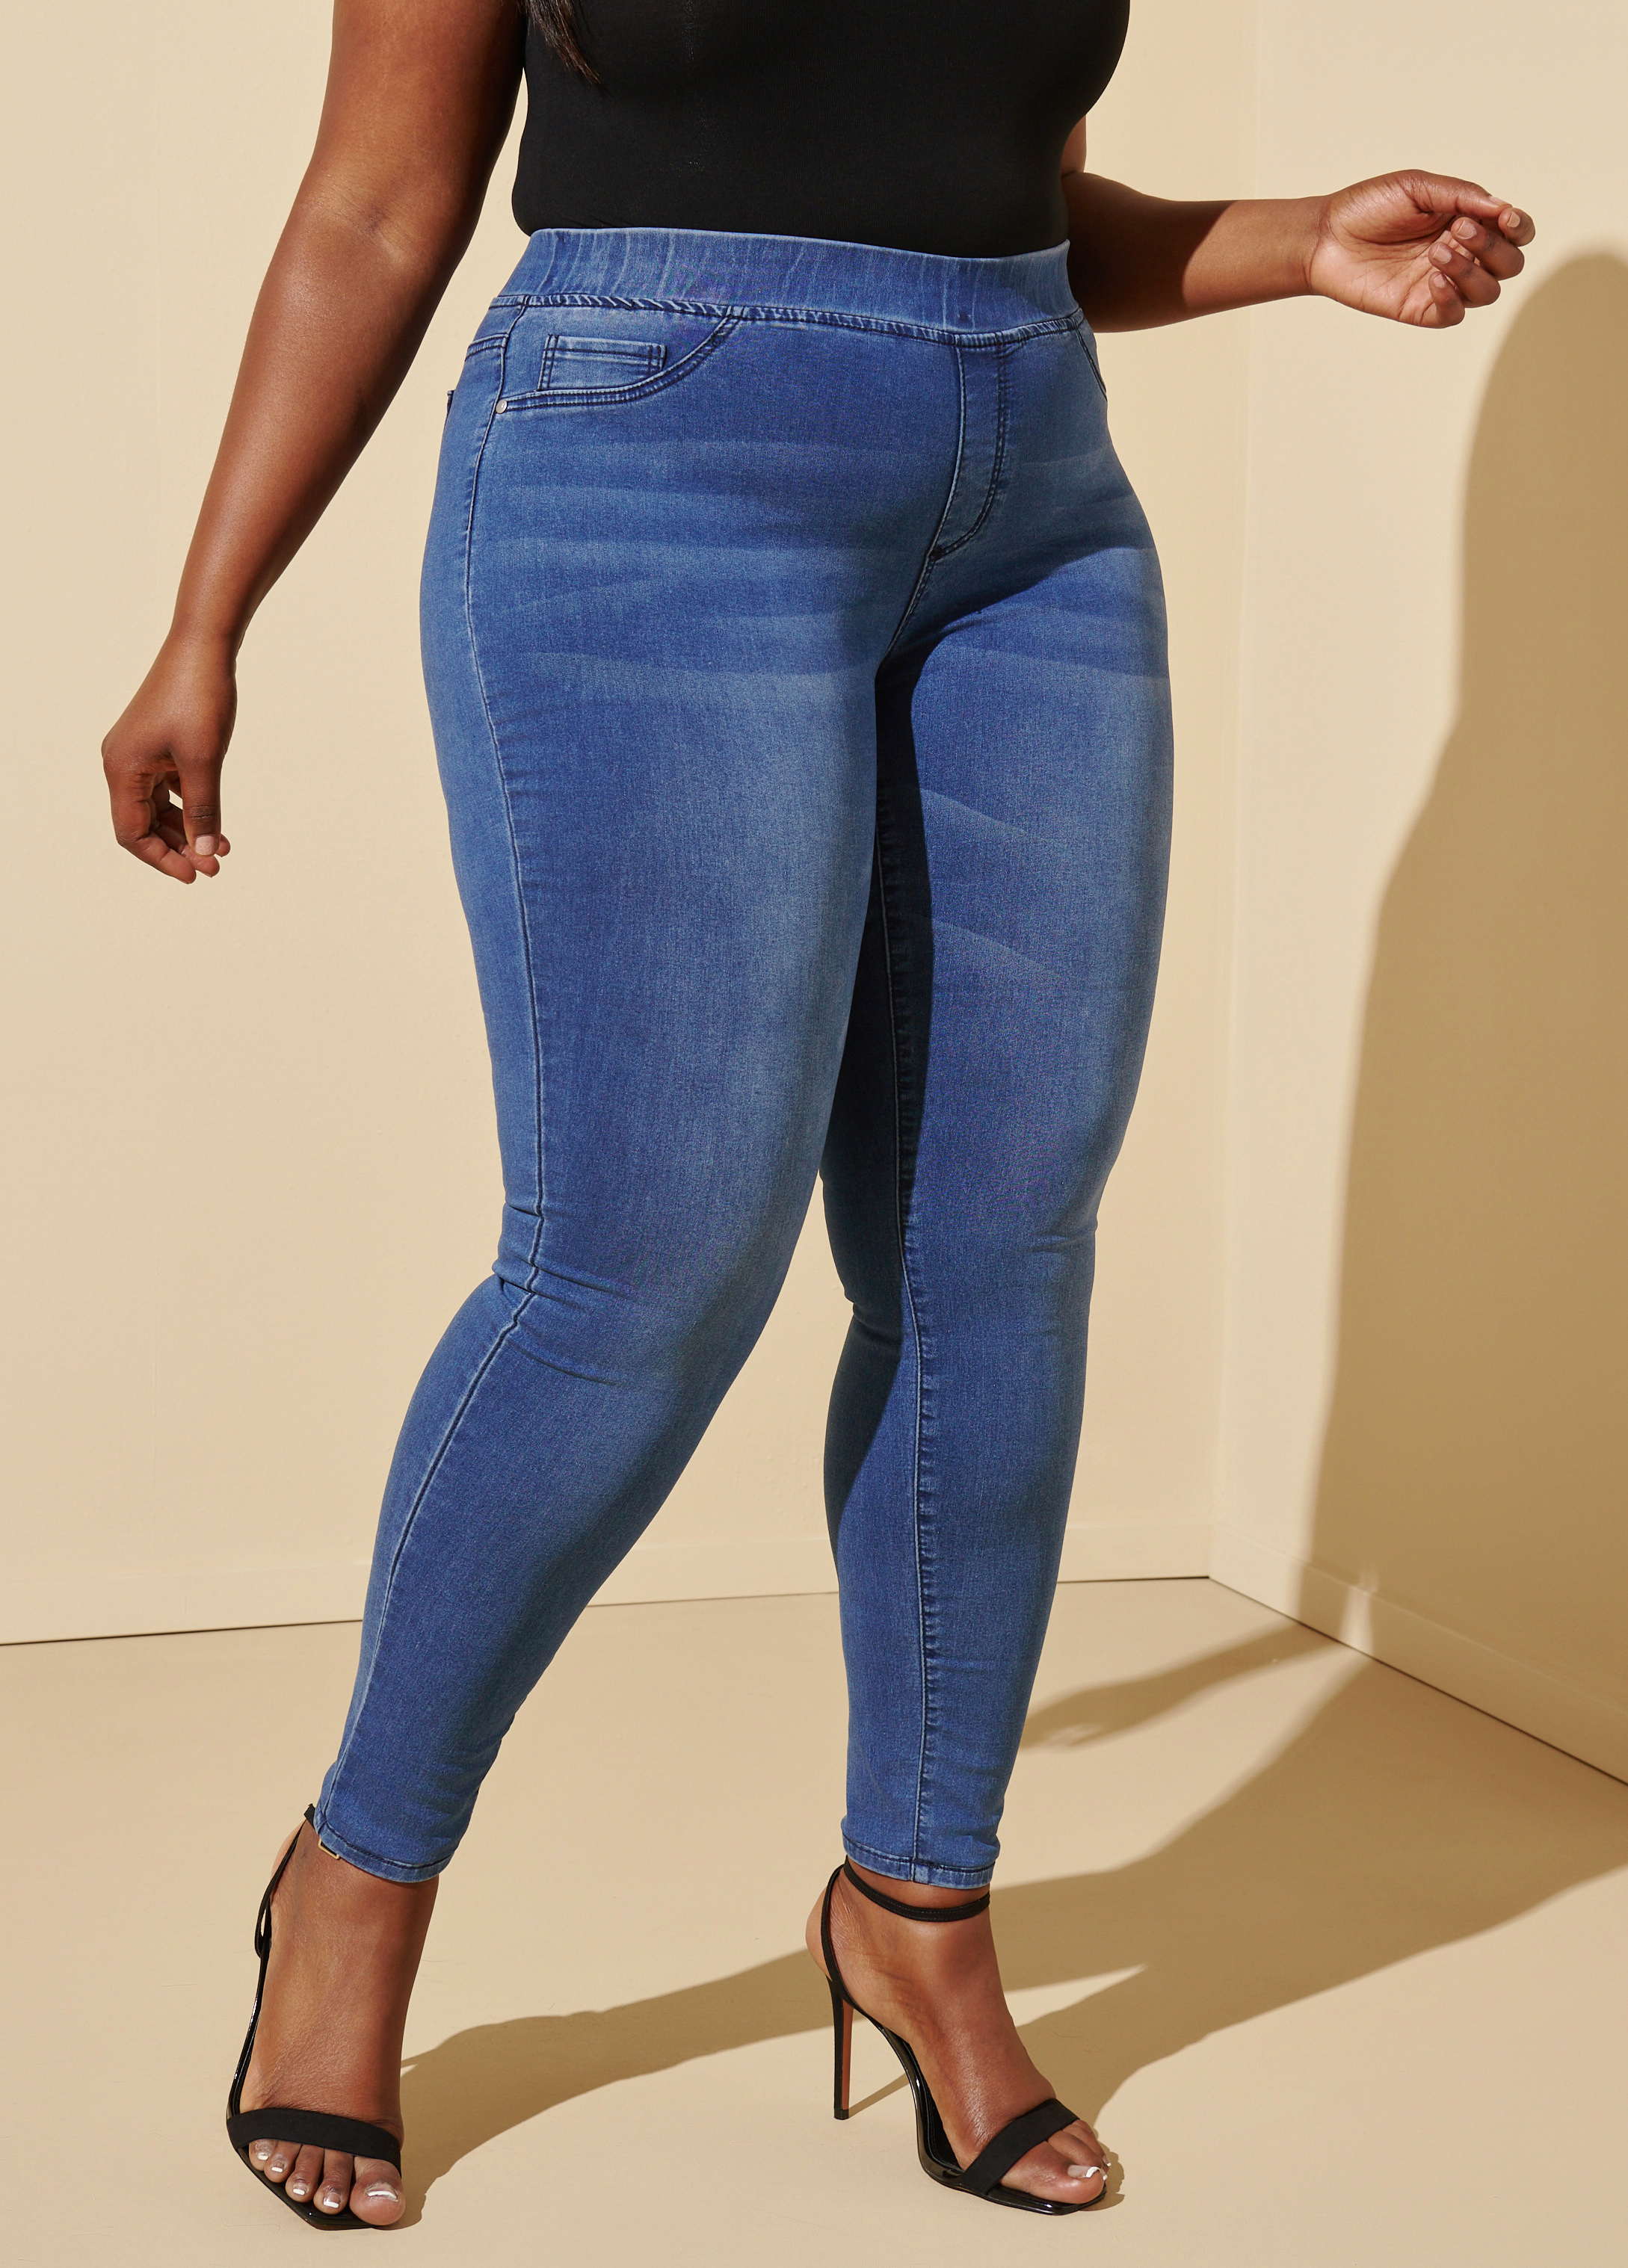 TWIN BIRDS® on Instagram: Bold, flattering, and stylish Denim Jeggings  with a twist of comfort. #boldwillhold #denimaddicted #jeggings #playwild  #stylemove #jeans #glamup #valentines